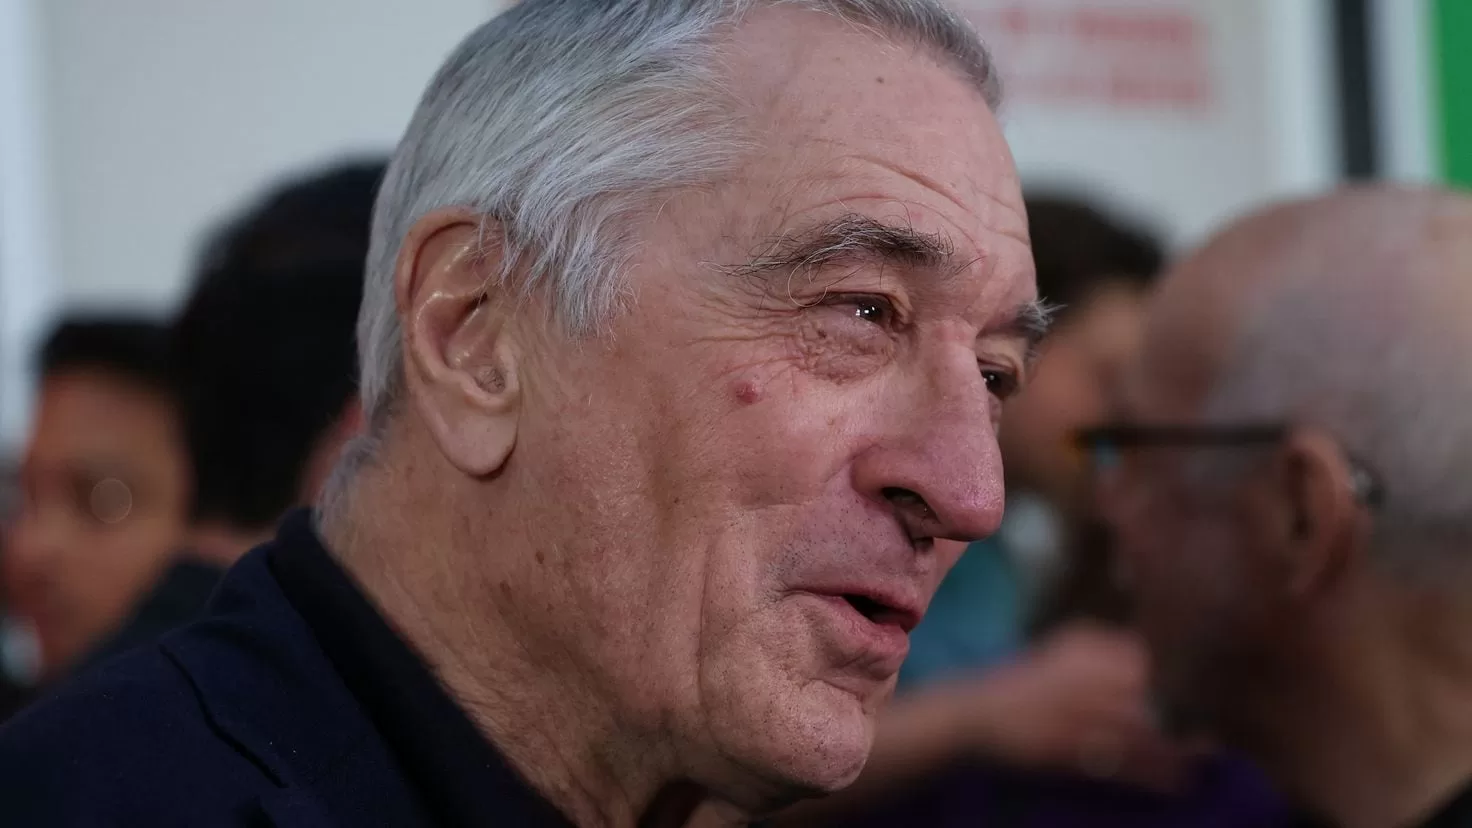 Robert De Niro, on the death of his 19-year-old grandson: It shouldn't have happened
